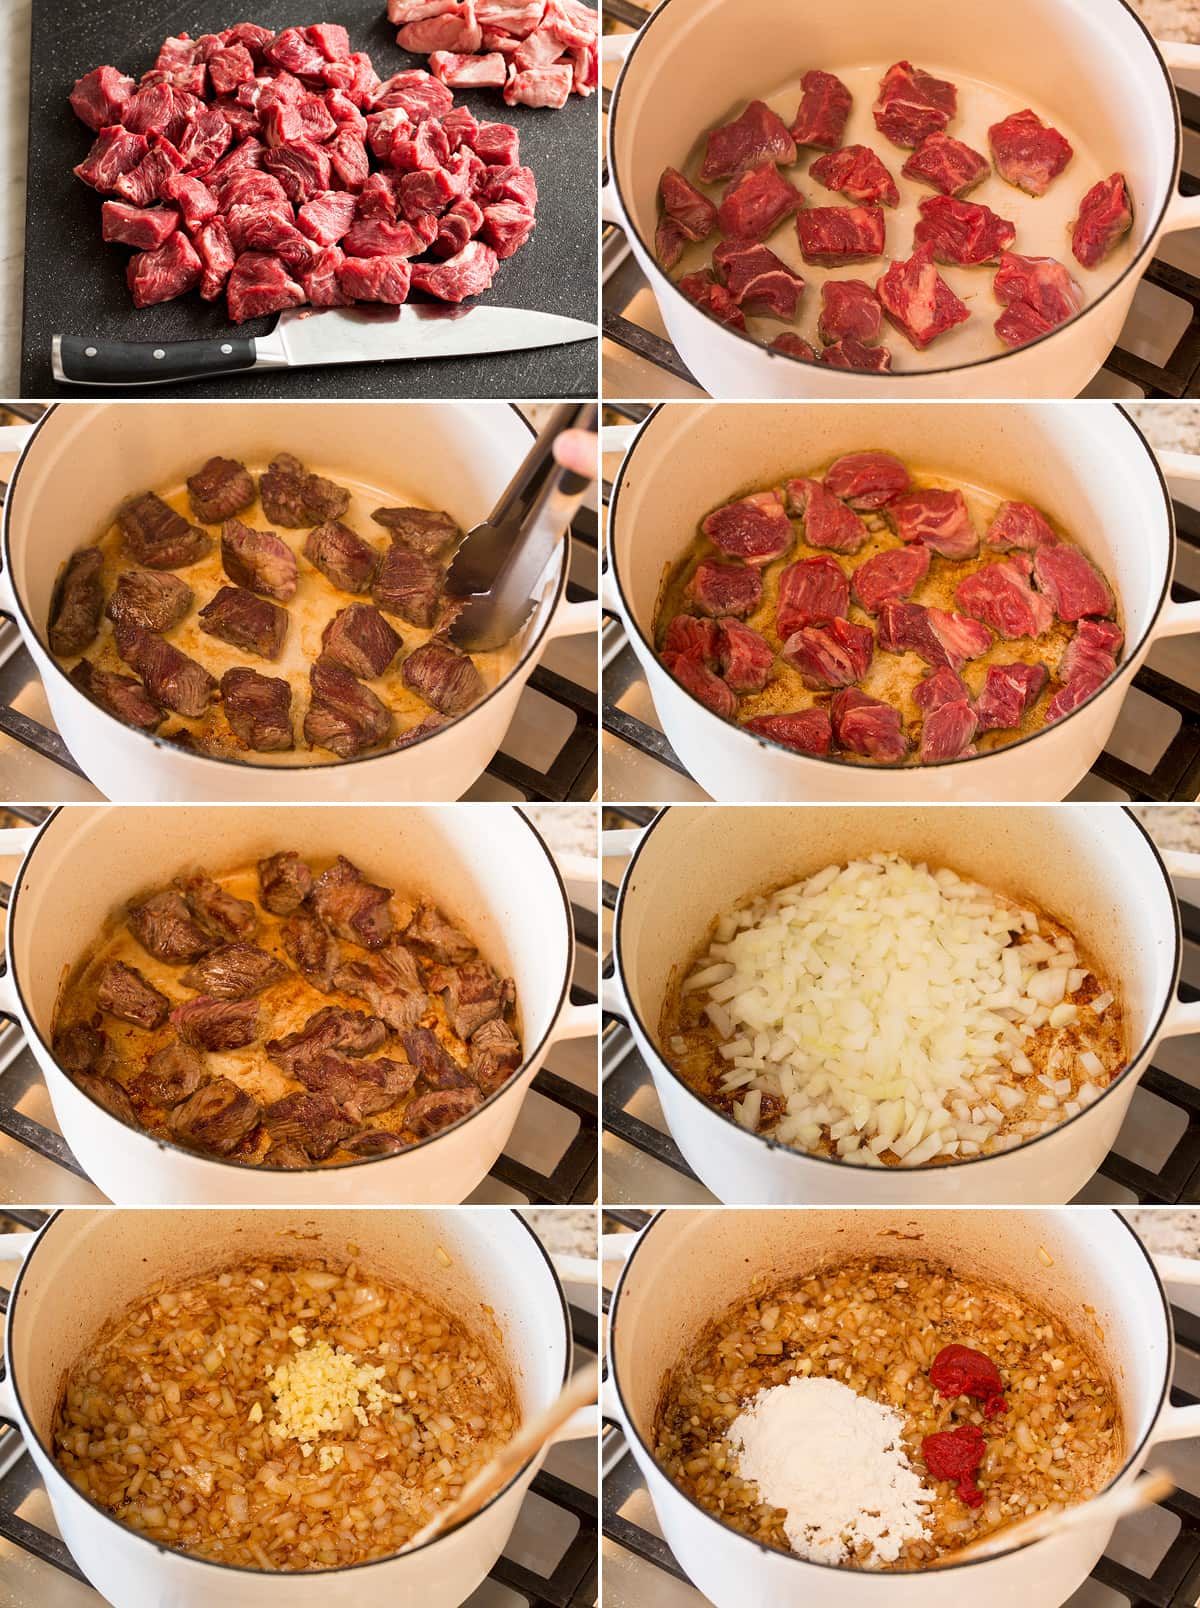 Collage of eight images showing steps of browning beef for beef stew in batches, then sautéing vegetables and making a roux.